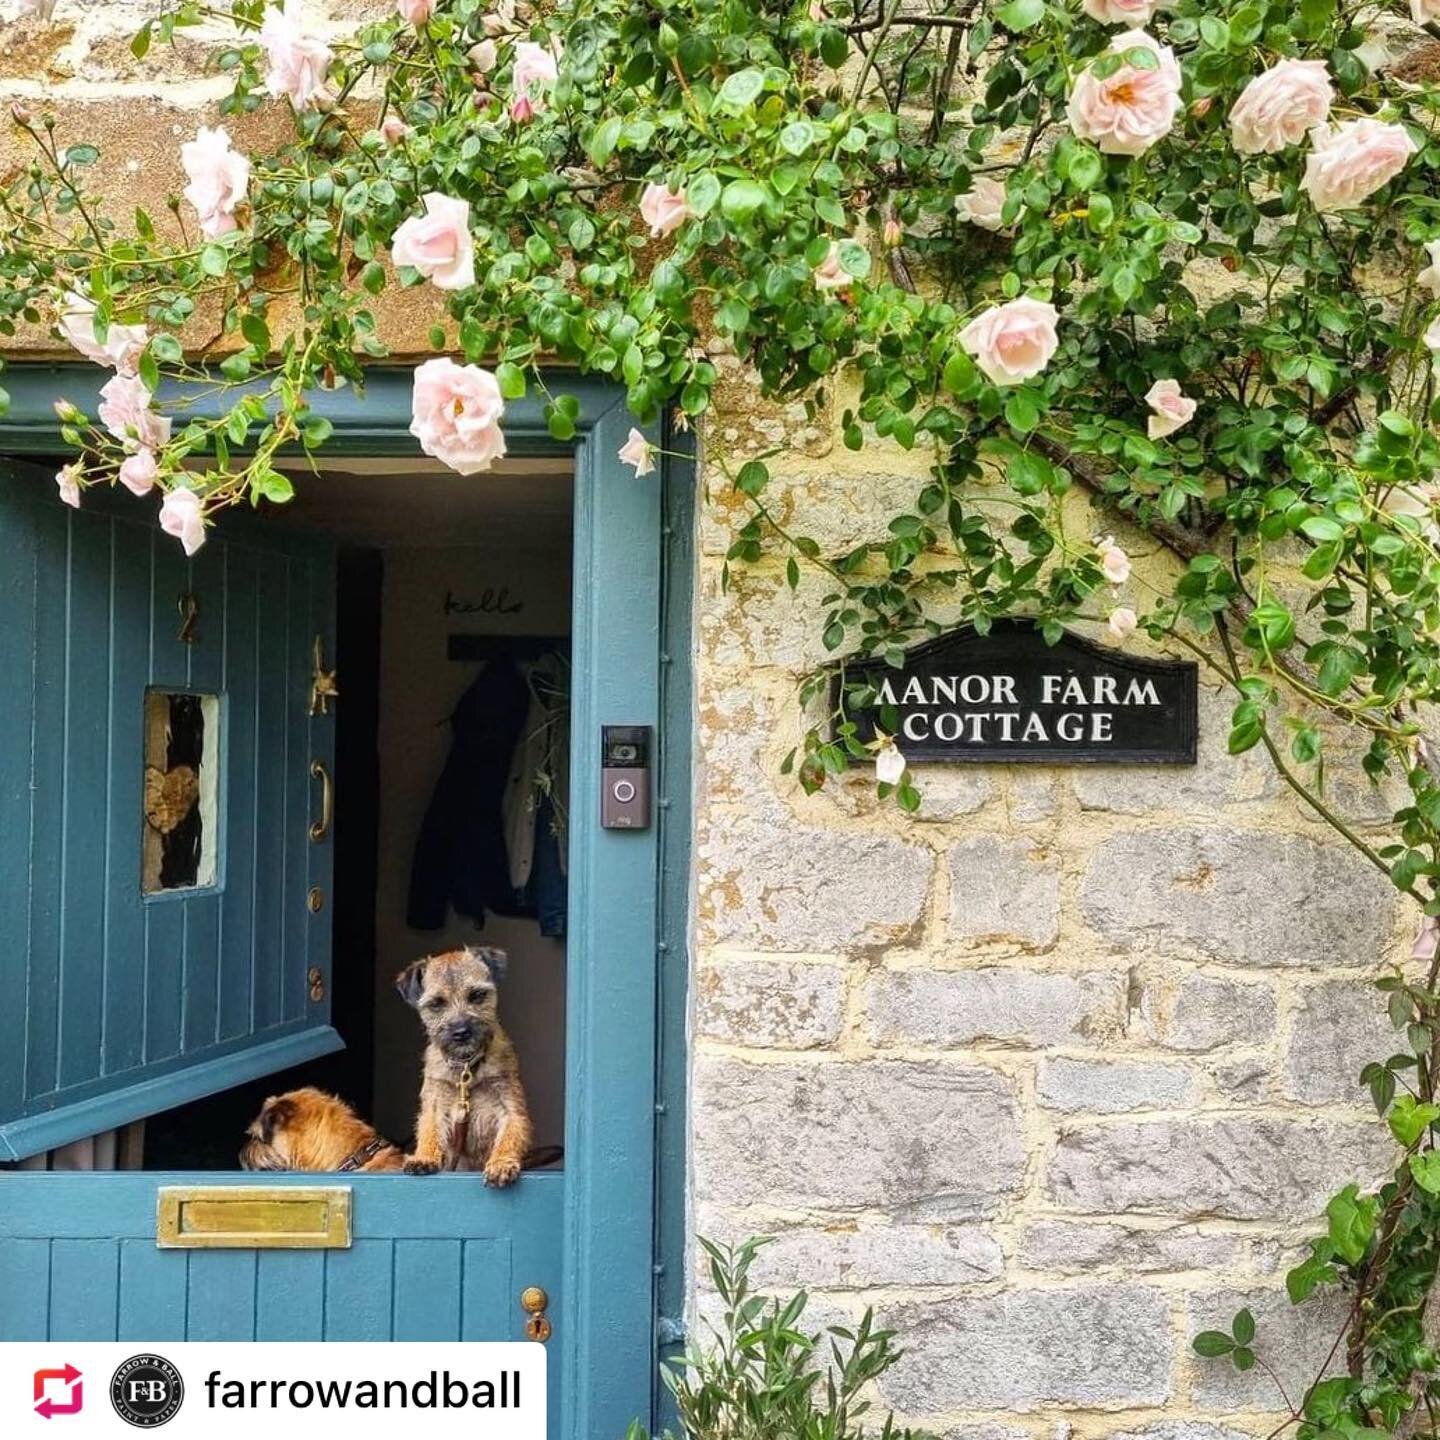 Nothing better to make your front door pop than a stunning shade like @farrowandball #InchyraBlue 
.
It&rsquo;s #farrowandballfriday and it&rsquo;s a great time to repaint your home&rsquo;s exterior, or even just your front door for a quick and punch